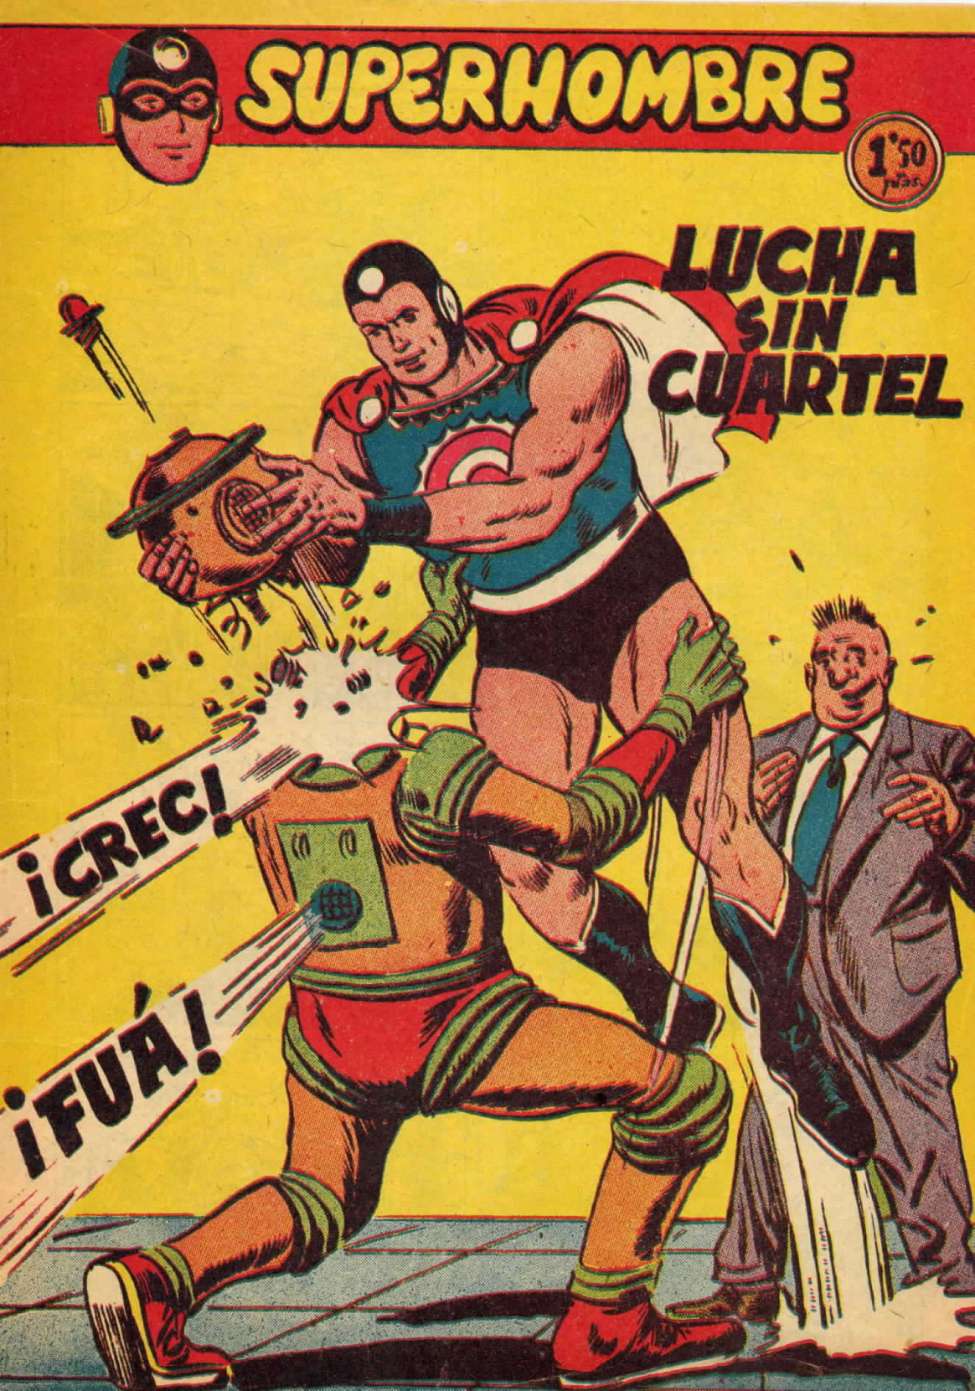 Book Cover For SuperHombre 41 Lucha sin cuartel